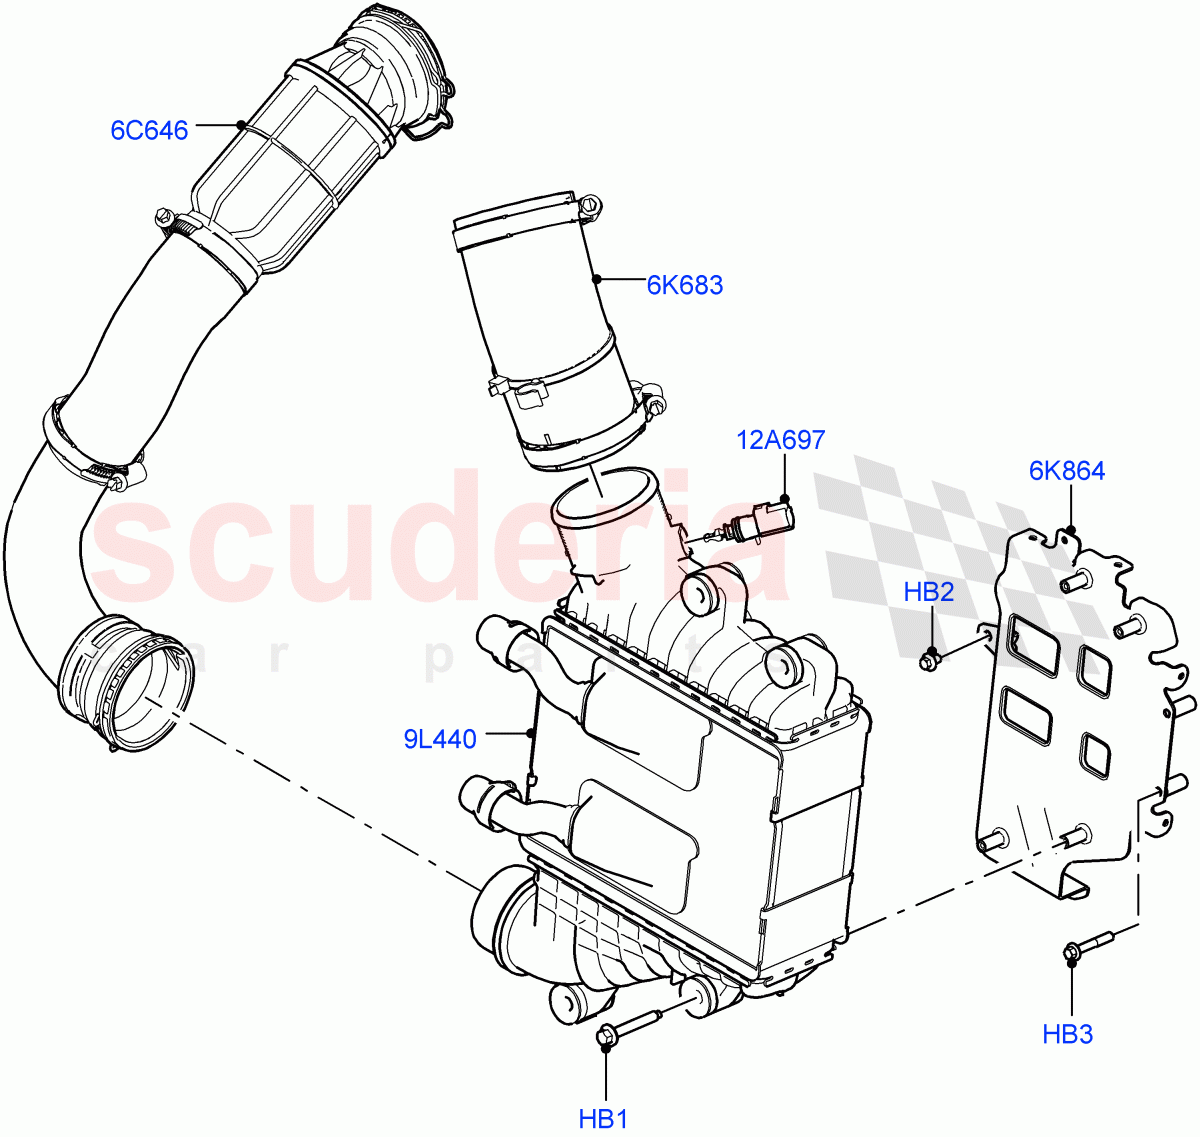 Intercooler/Air Ducts And Hoses(2.0L I4 DSL HIGH DOHC AJ200,Itatiaia (Brazil))((V)FROMJT000001) of Land Rover Land Rover Range Rover Evoque (2012-2018) [2.0 Turbo Diesel]